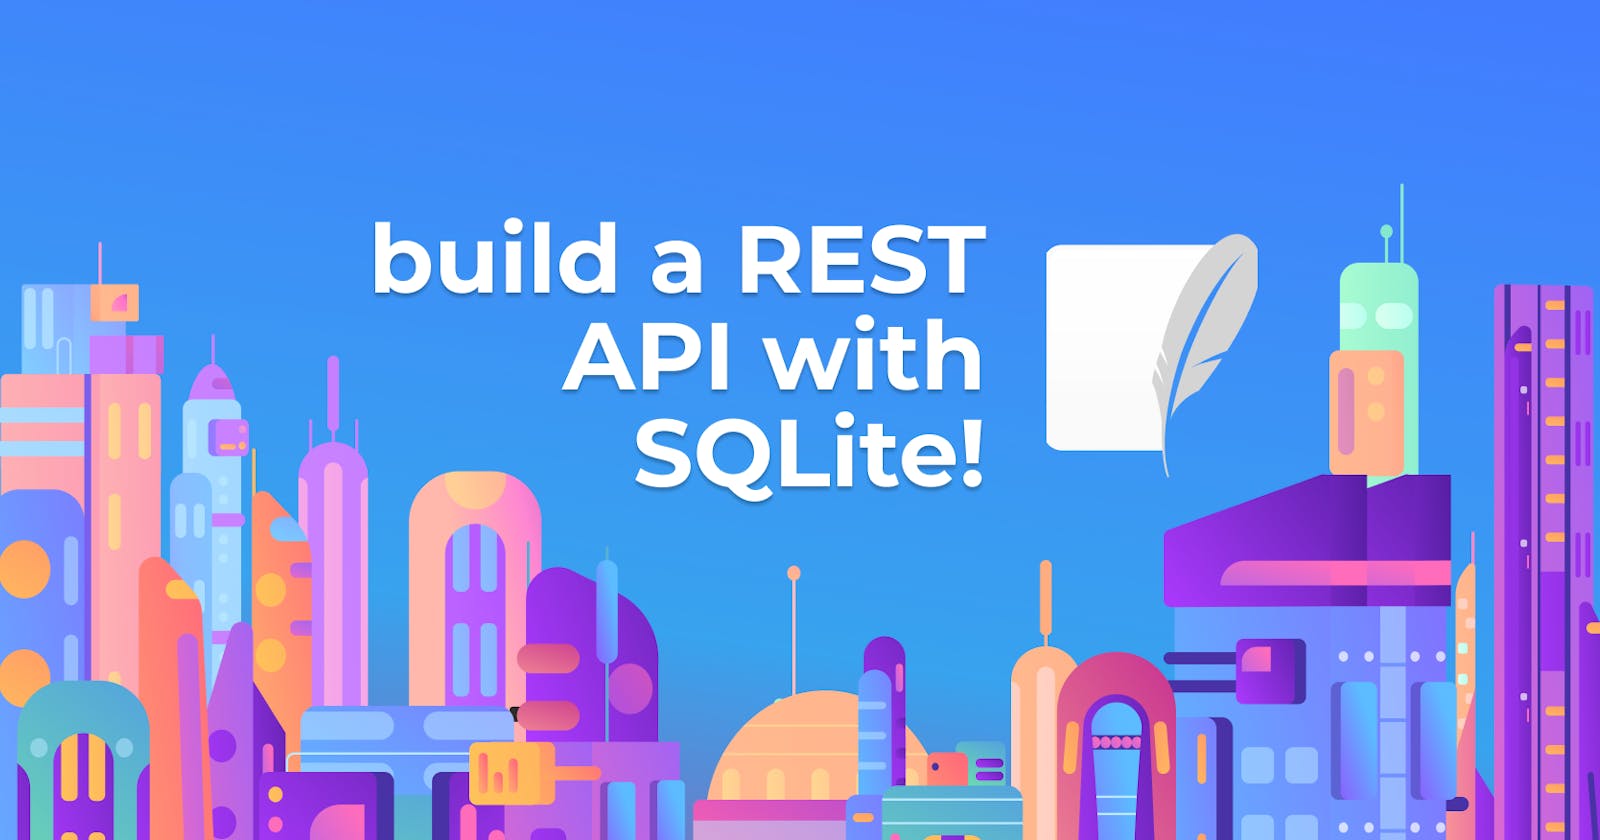 Building a REST API with Feathers.js and SQLite